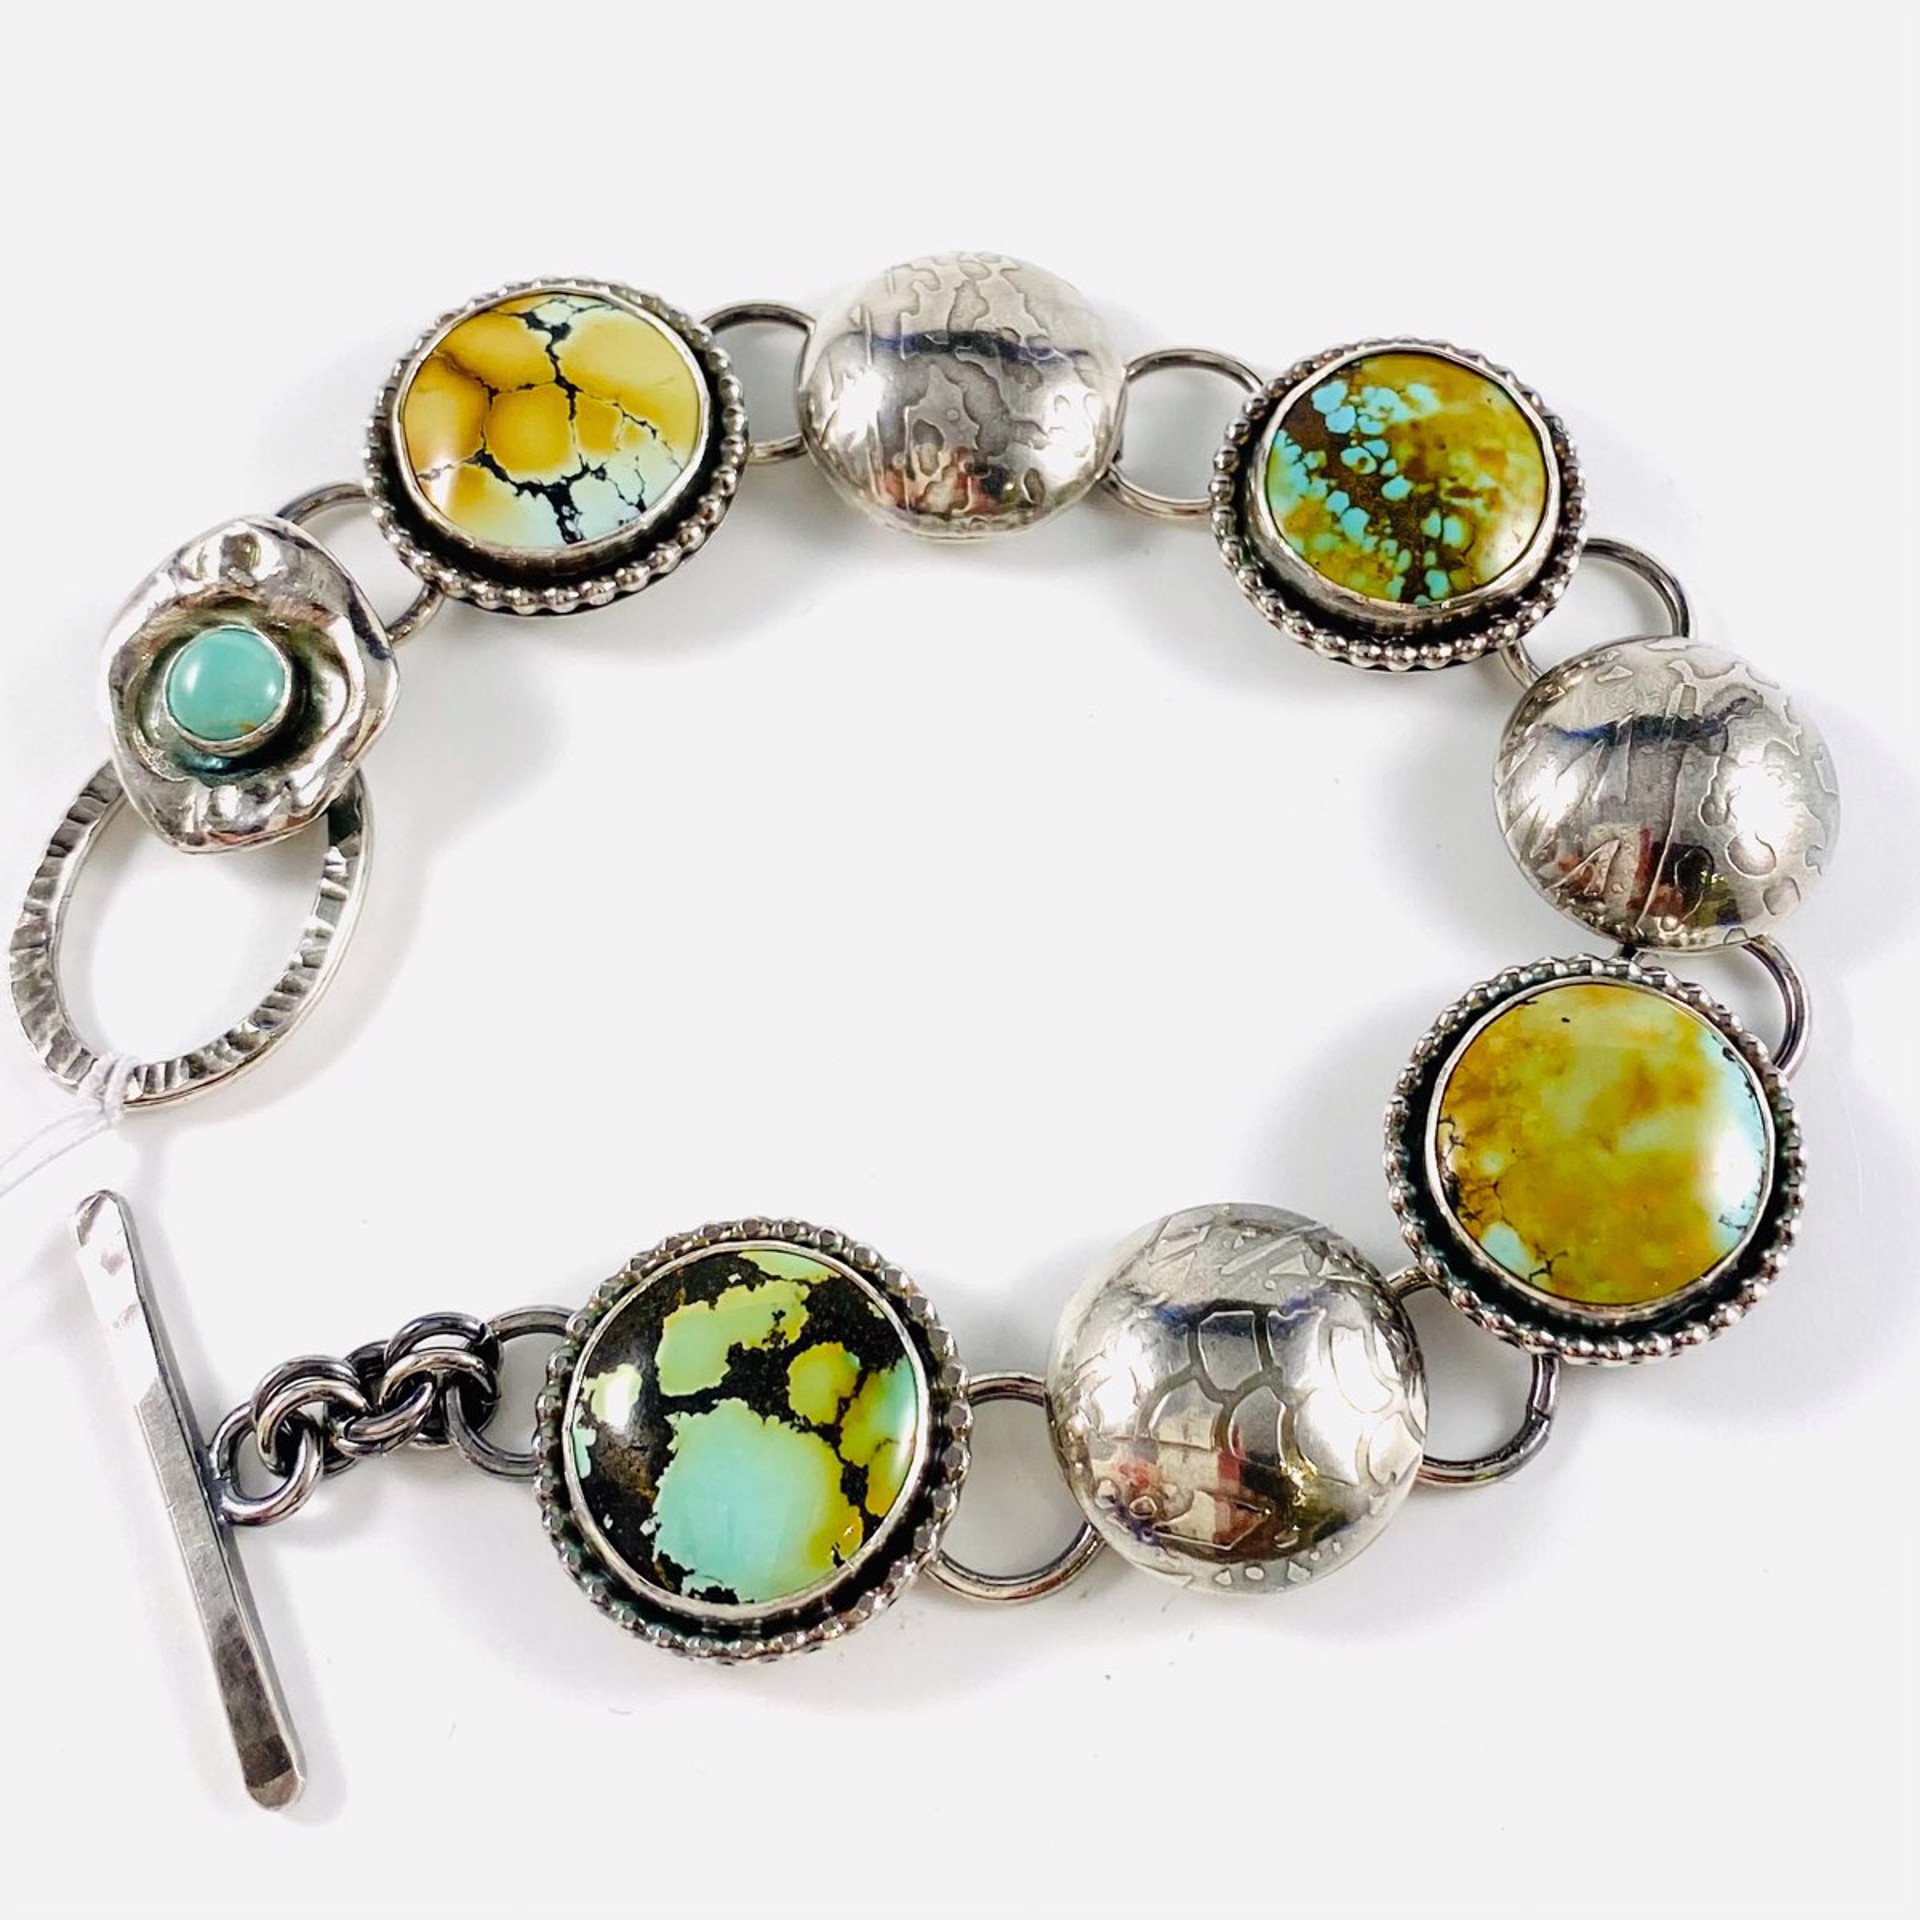 Four Treasure Mountain Turquoise Rounds with bead bezel, Three Silver Dome spacers Link Bracelet AB22-79 by Anne Bivens